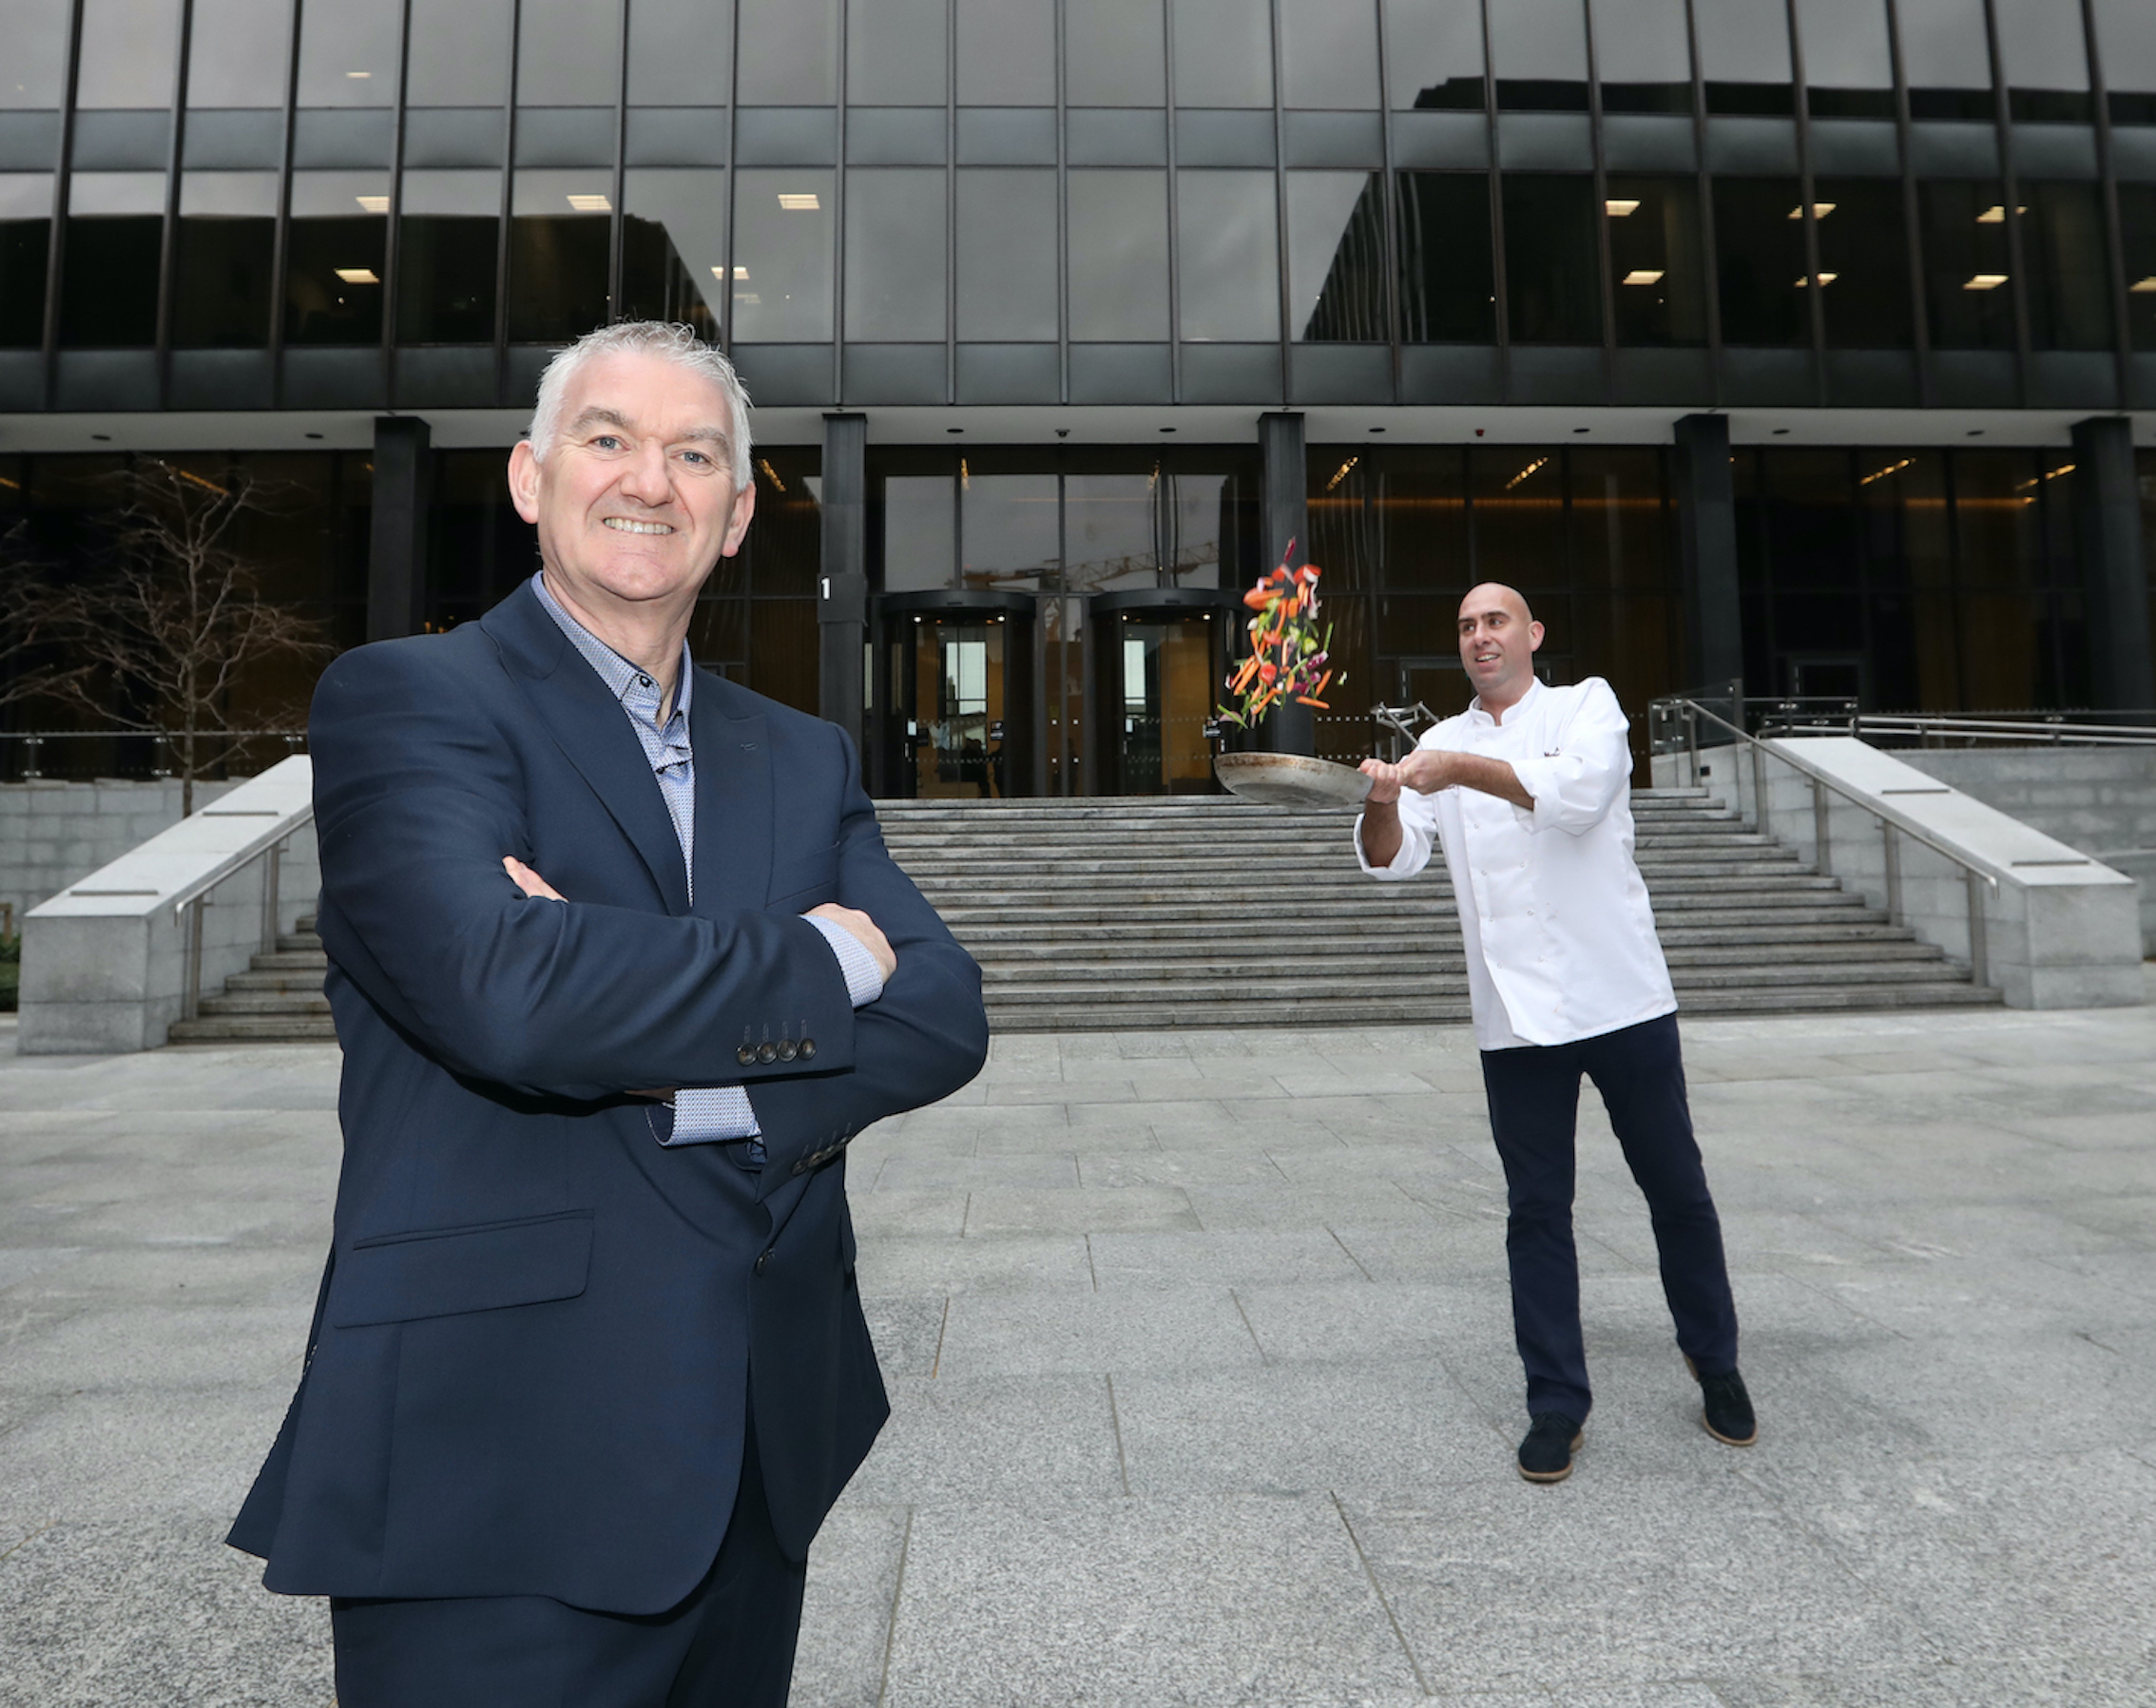 Mount Charles continues to grow its market share in Ireland